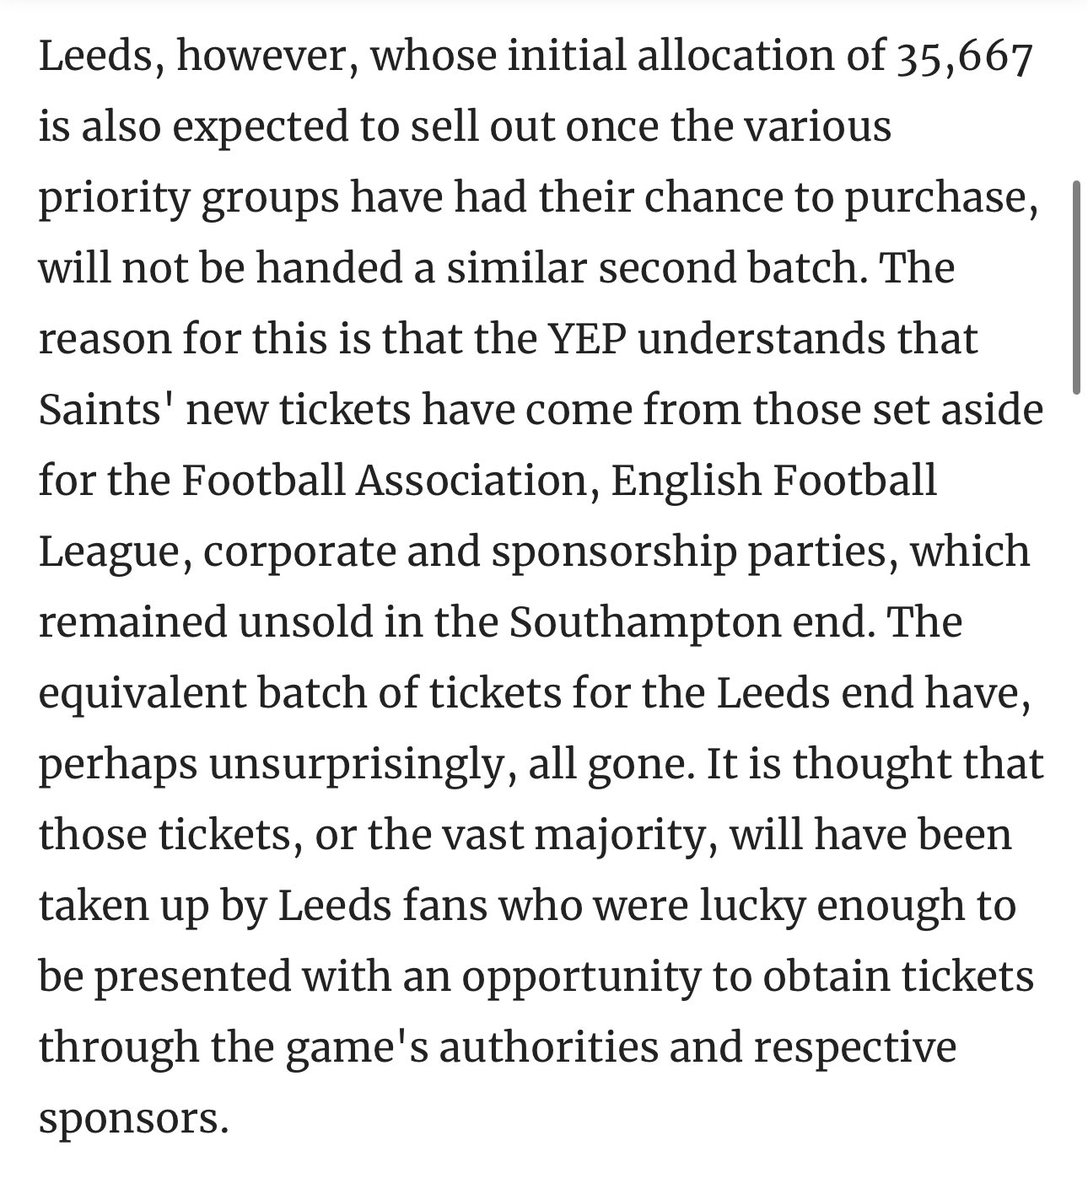 Reason why Southampton got extra tickets and why we won’t… #LUFC